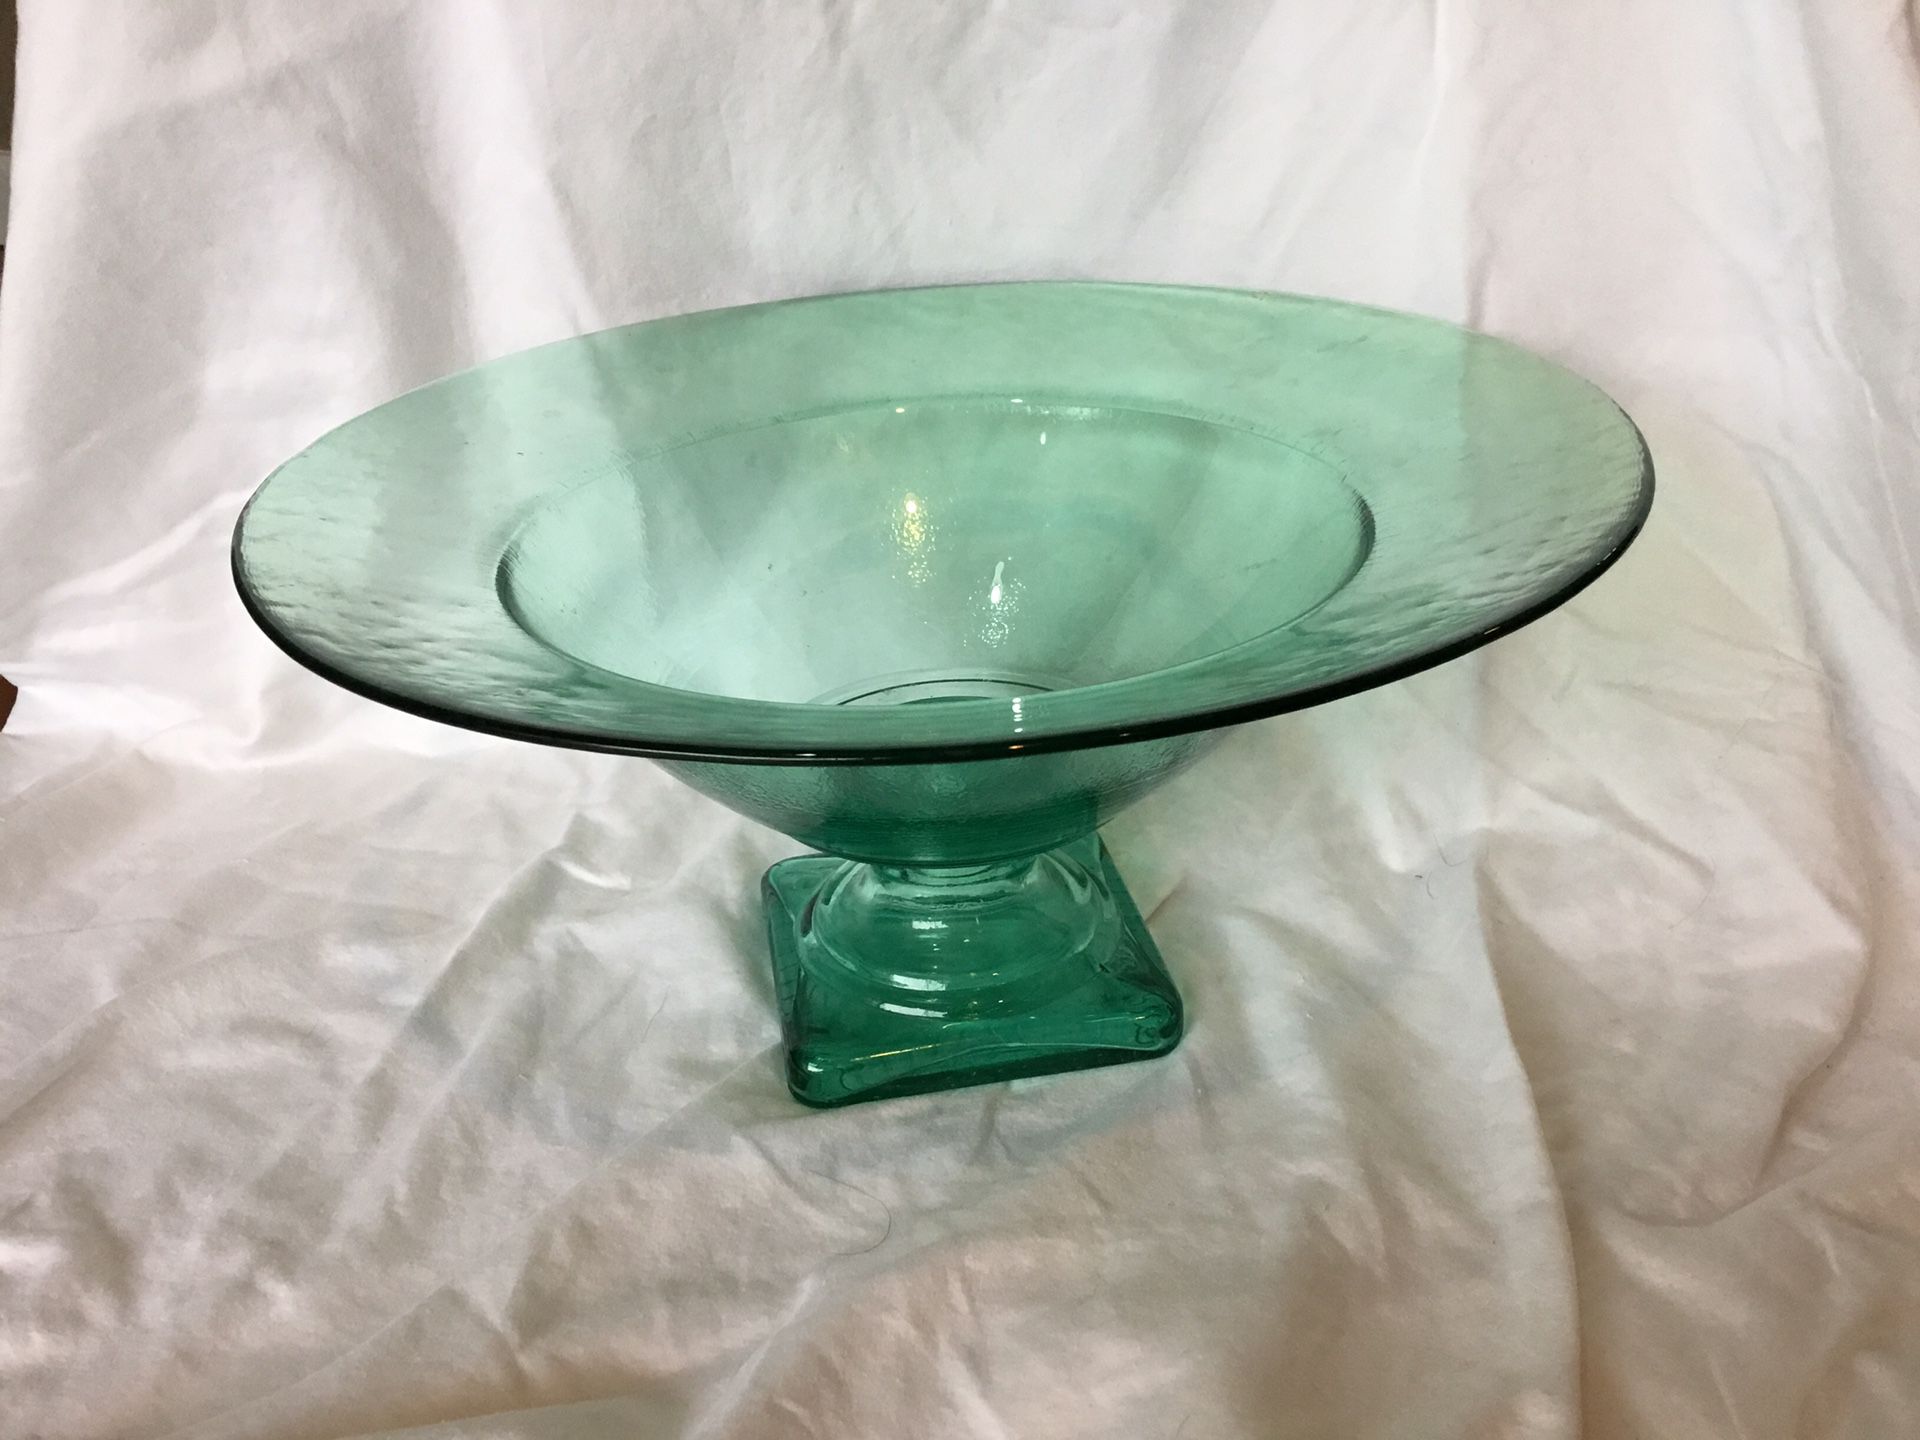 Recycled green glass console bowl